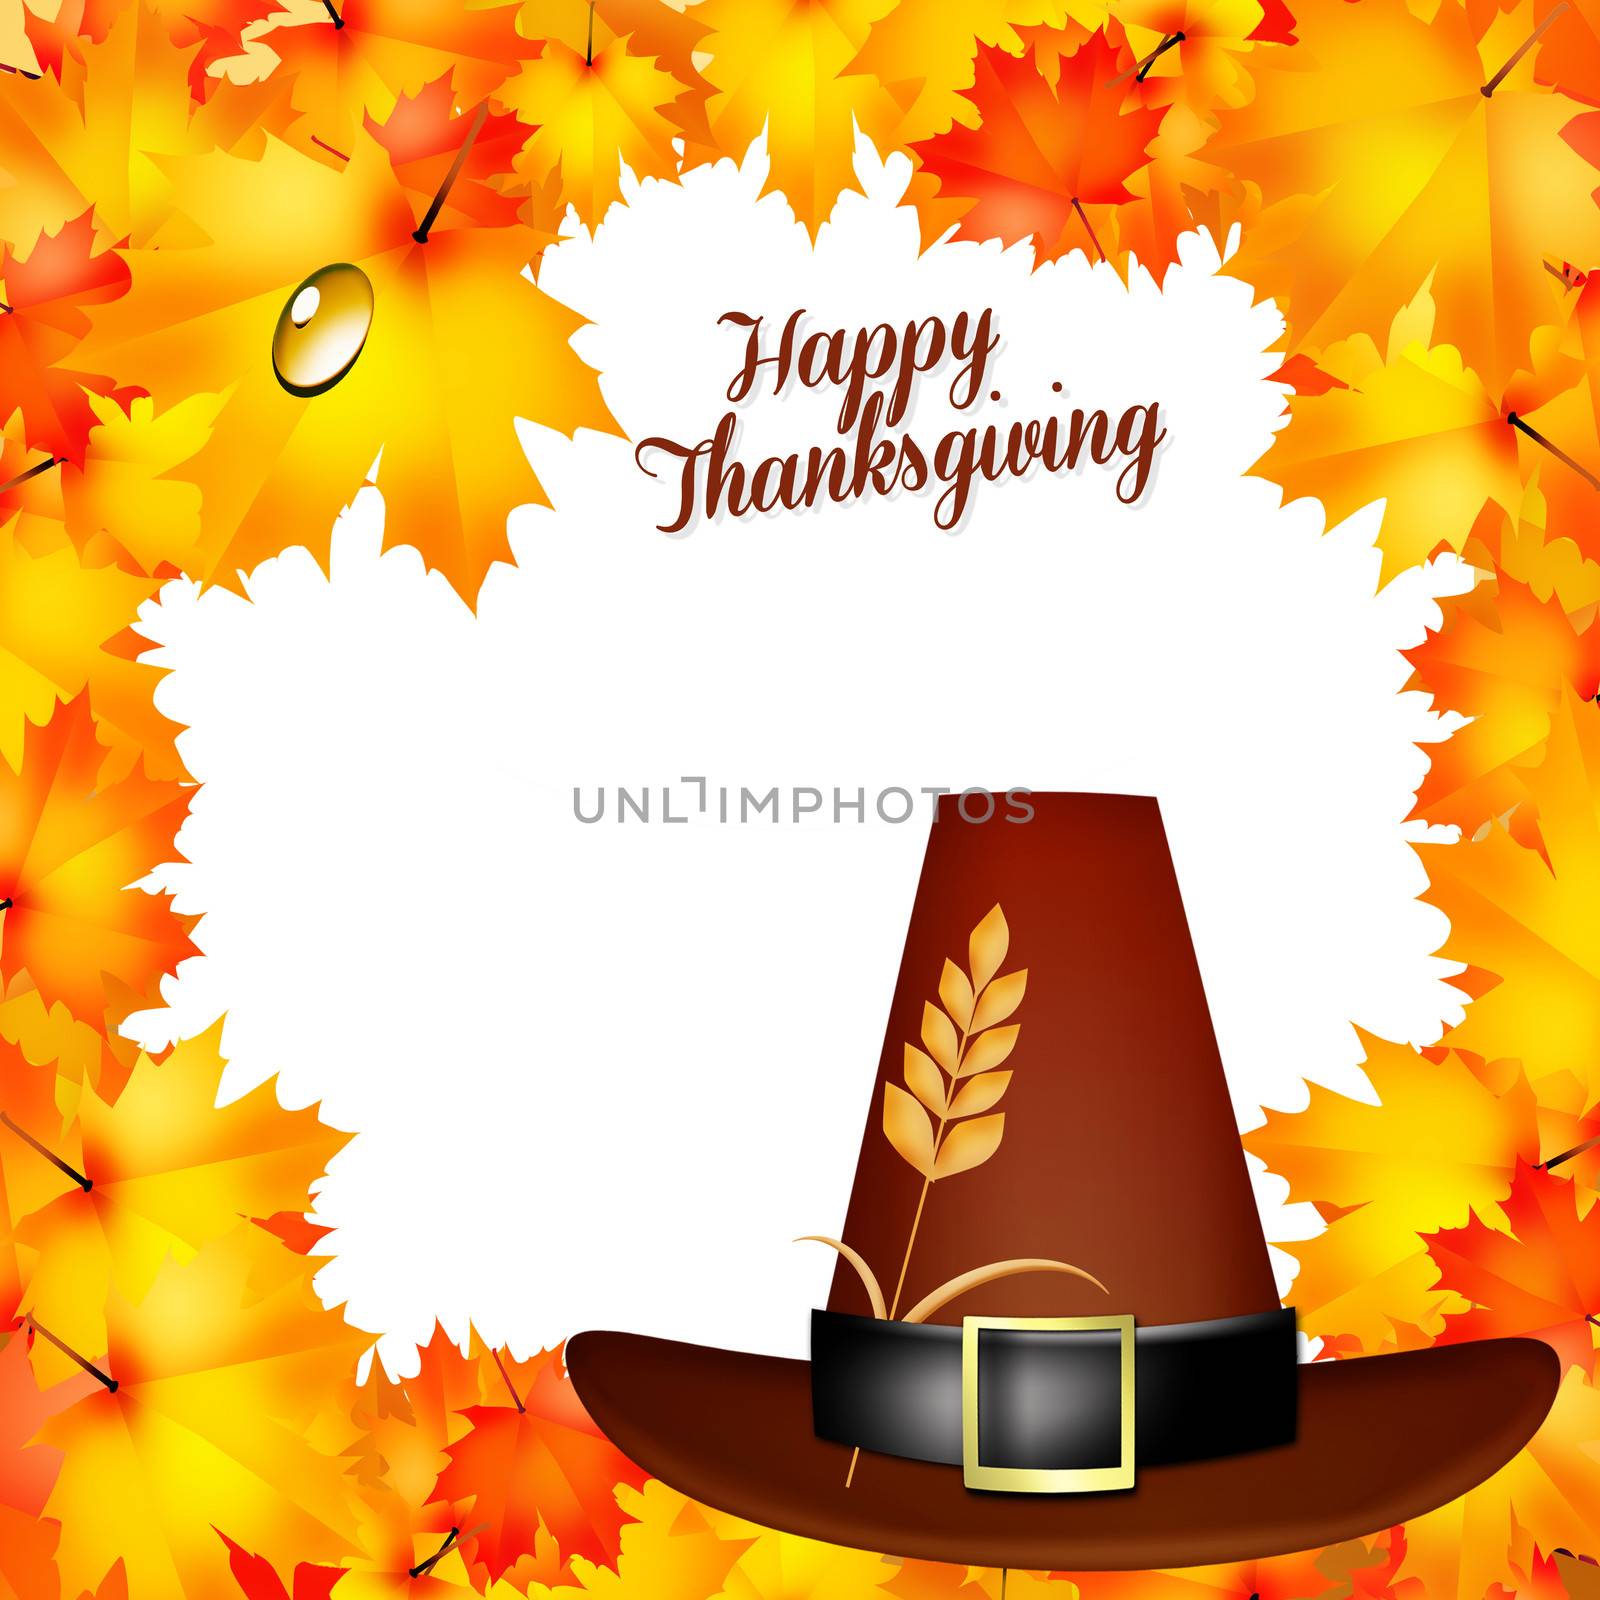 Happy Thanksgiving by adrenalina